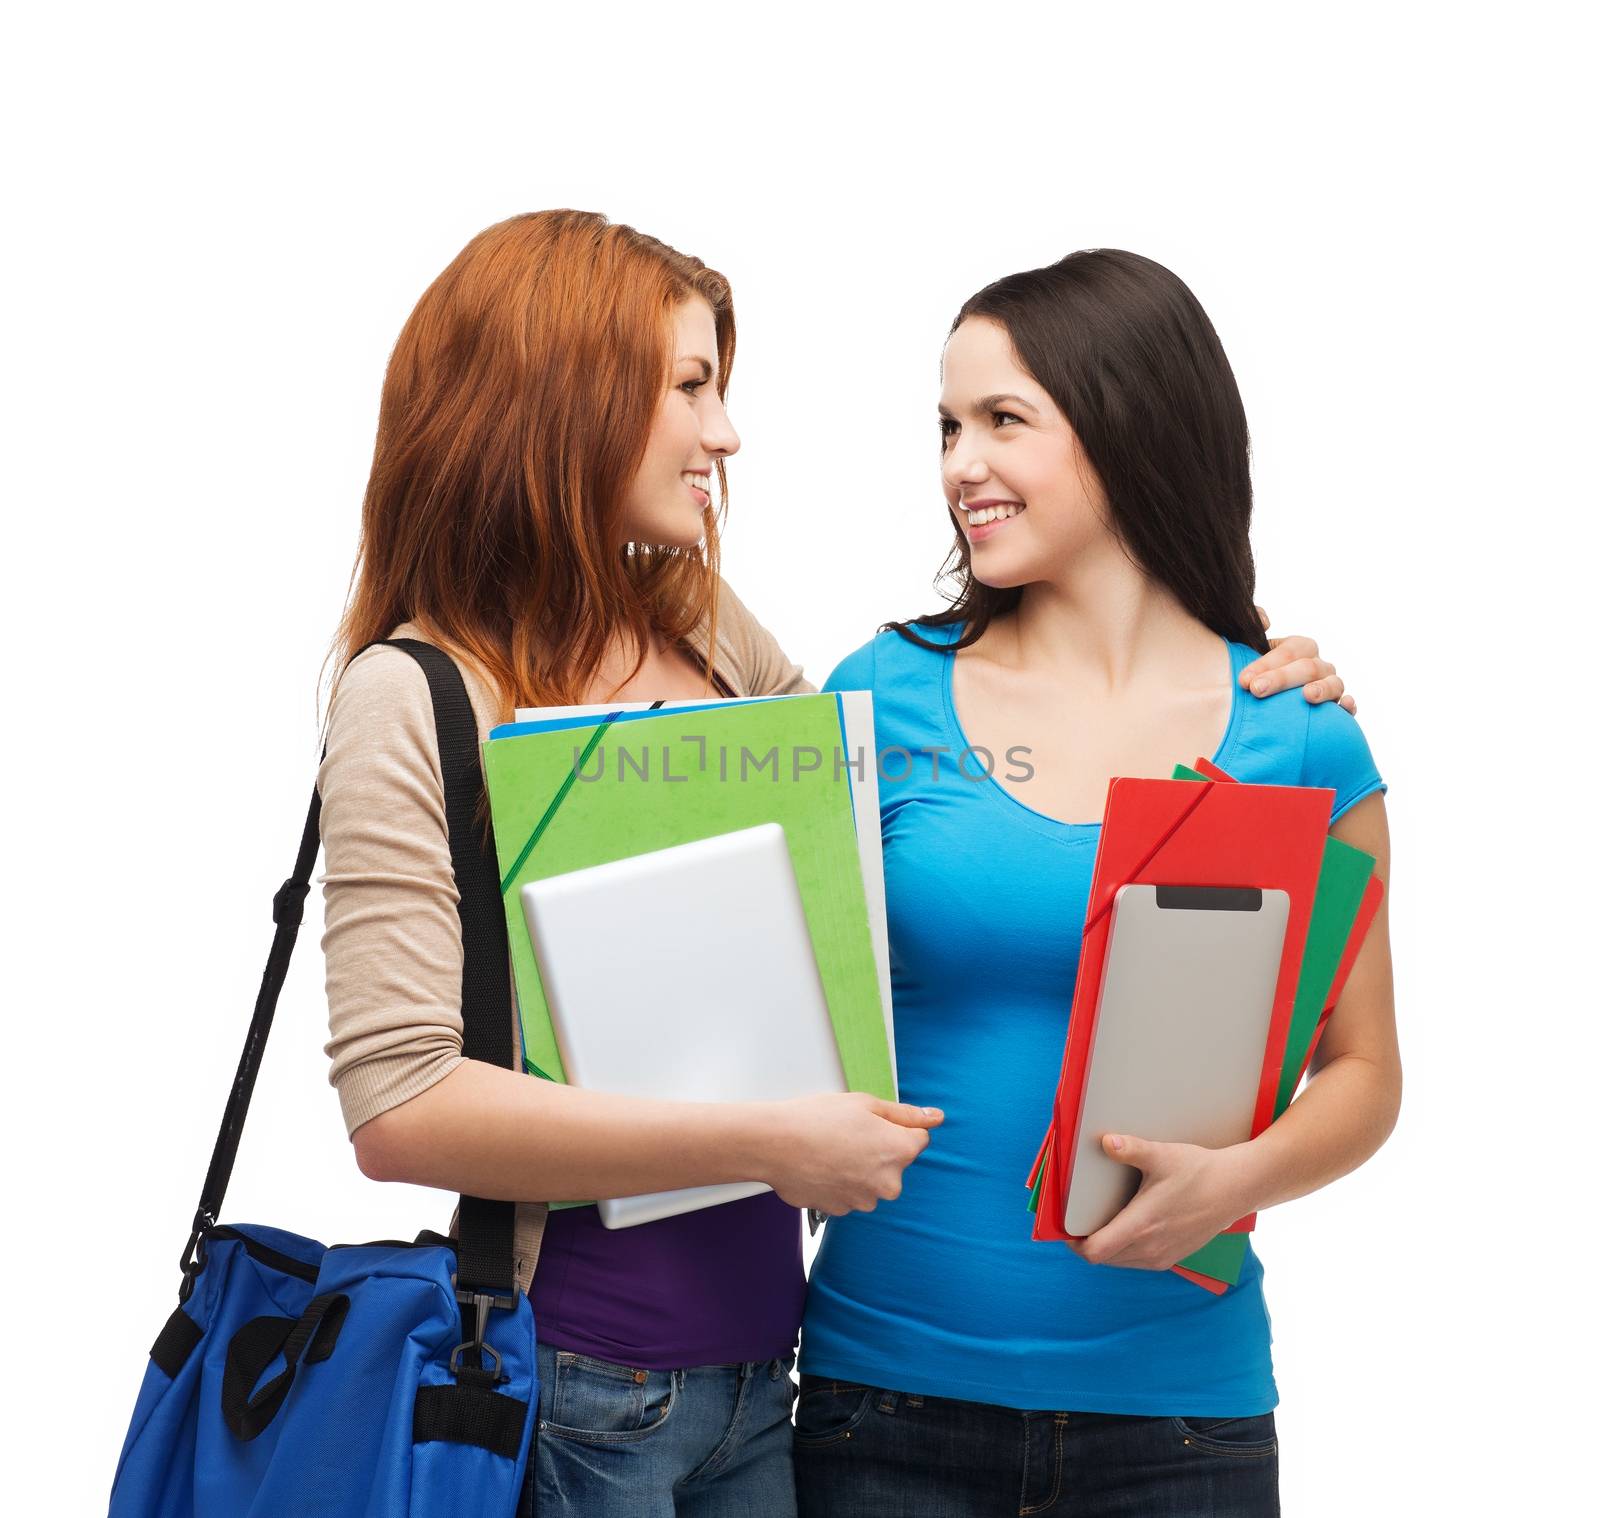 education and people concept - two smiling students with bag and folders standing looking at each other